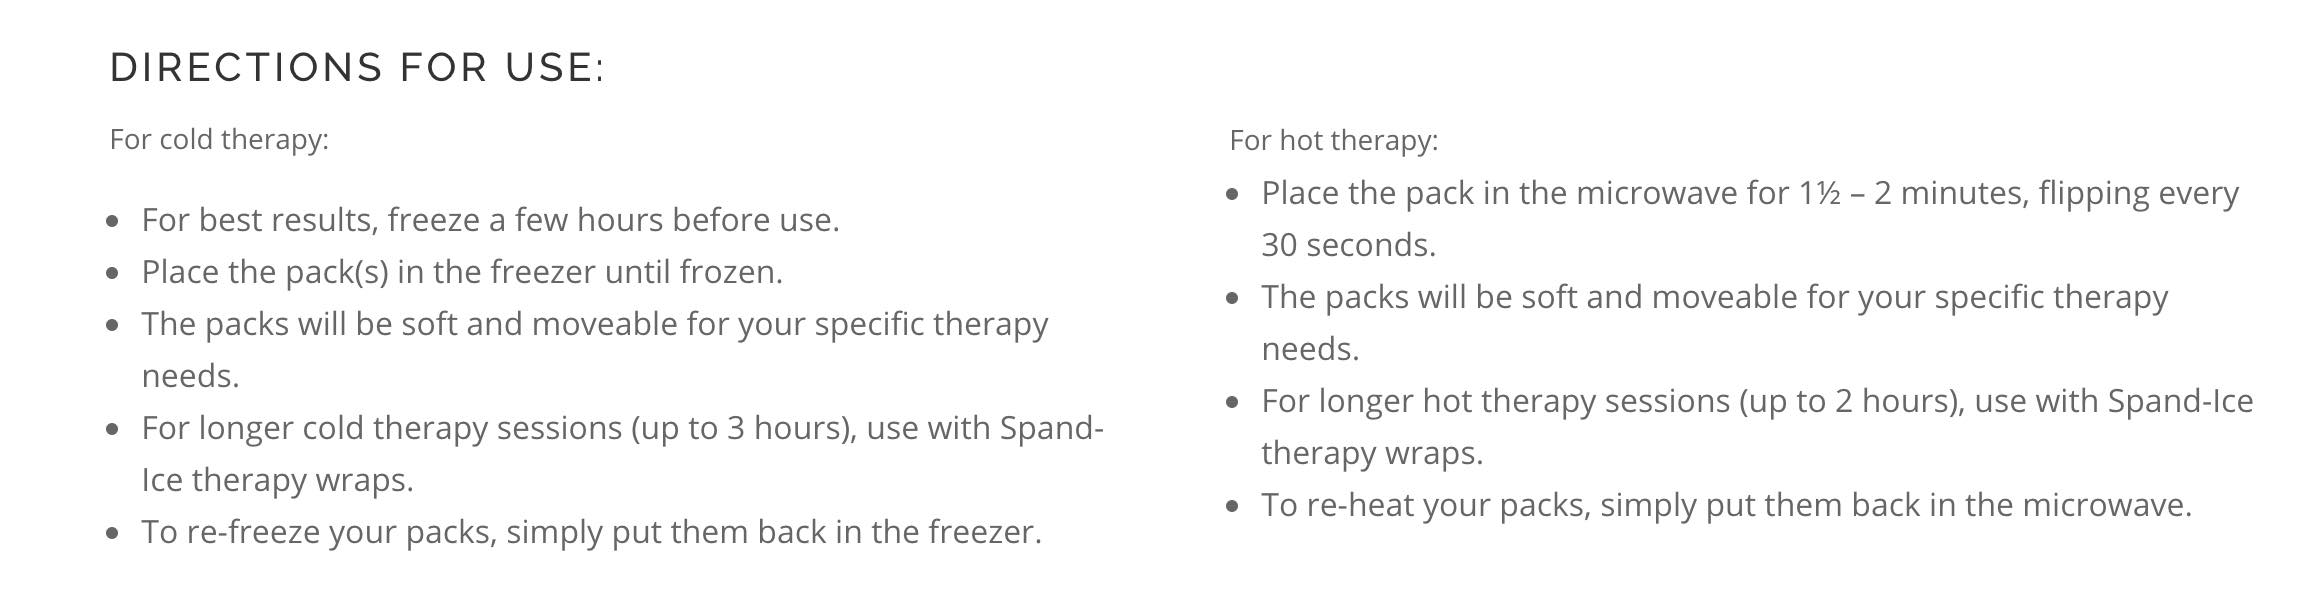 Spand-Ice Instructions